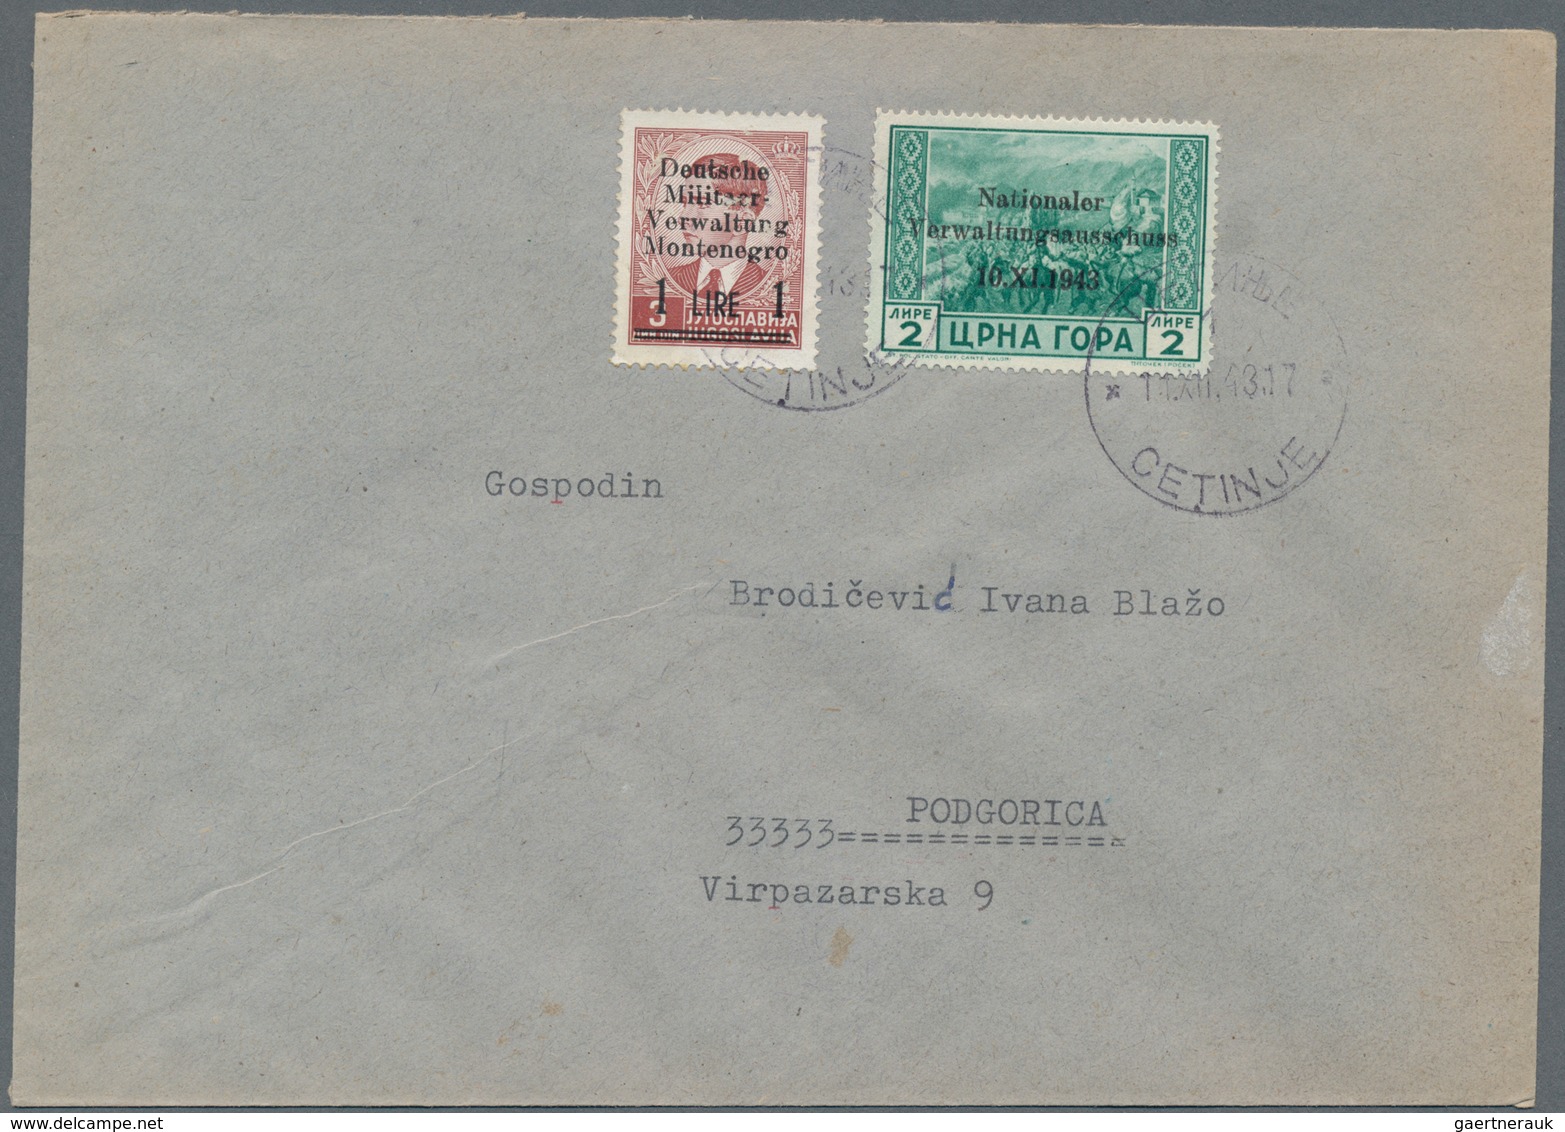 Europa - Süd: 1941-44 ca.: About 300 covers, postcards, FDC's and postal stationery items from Serbi